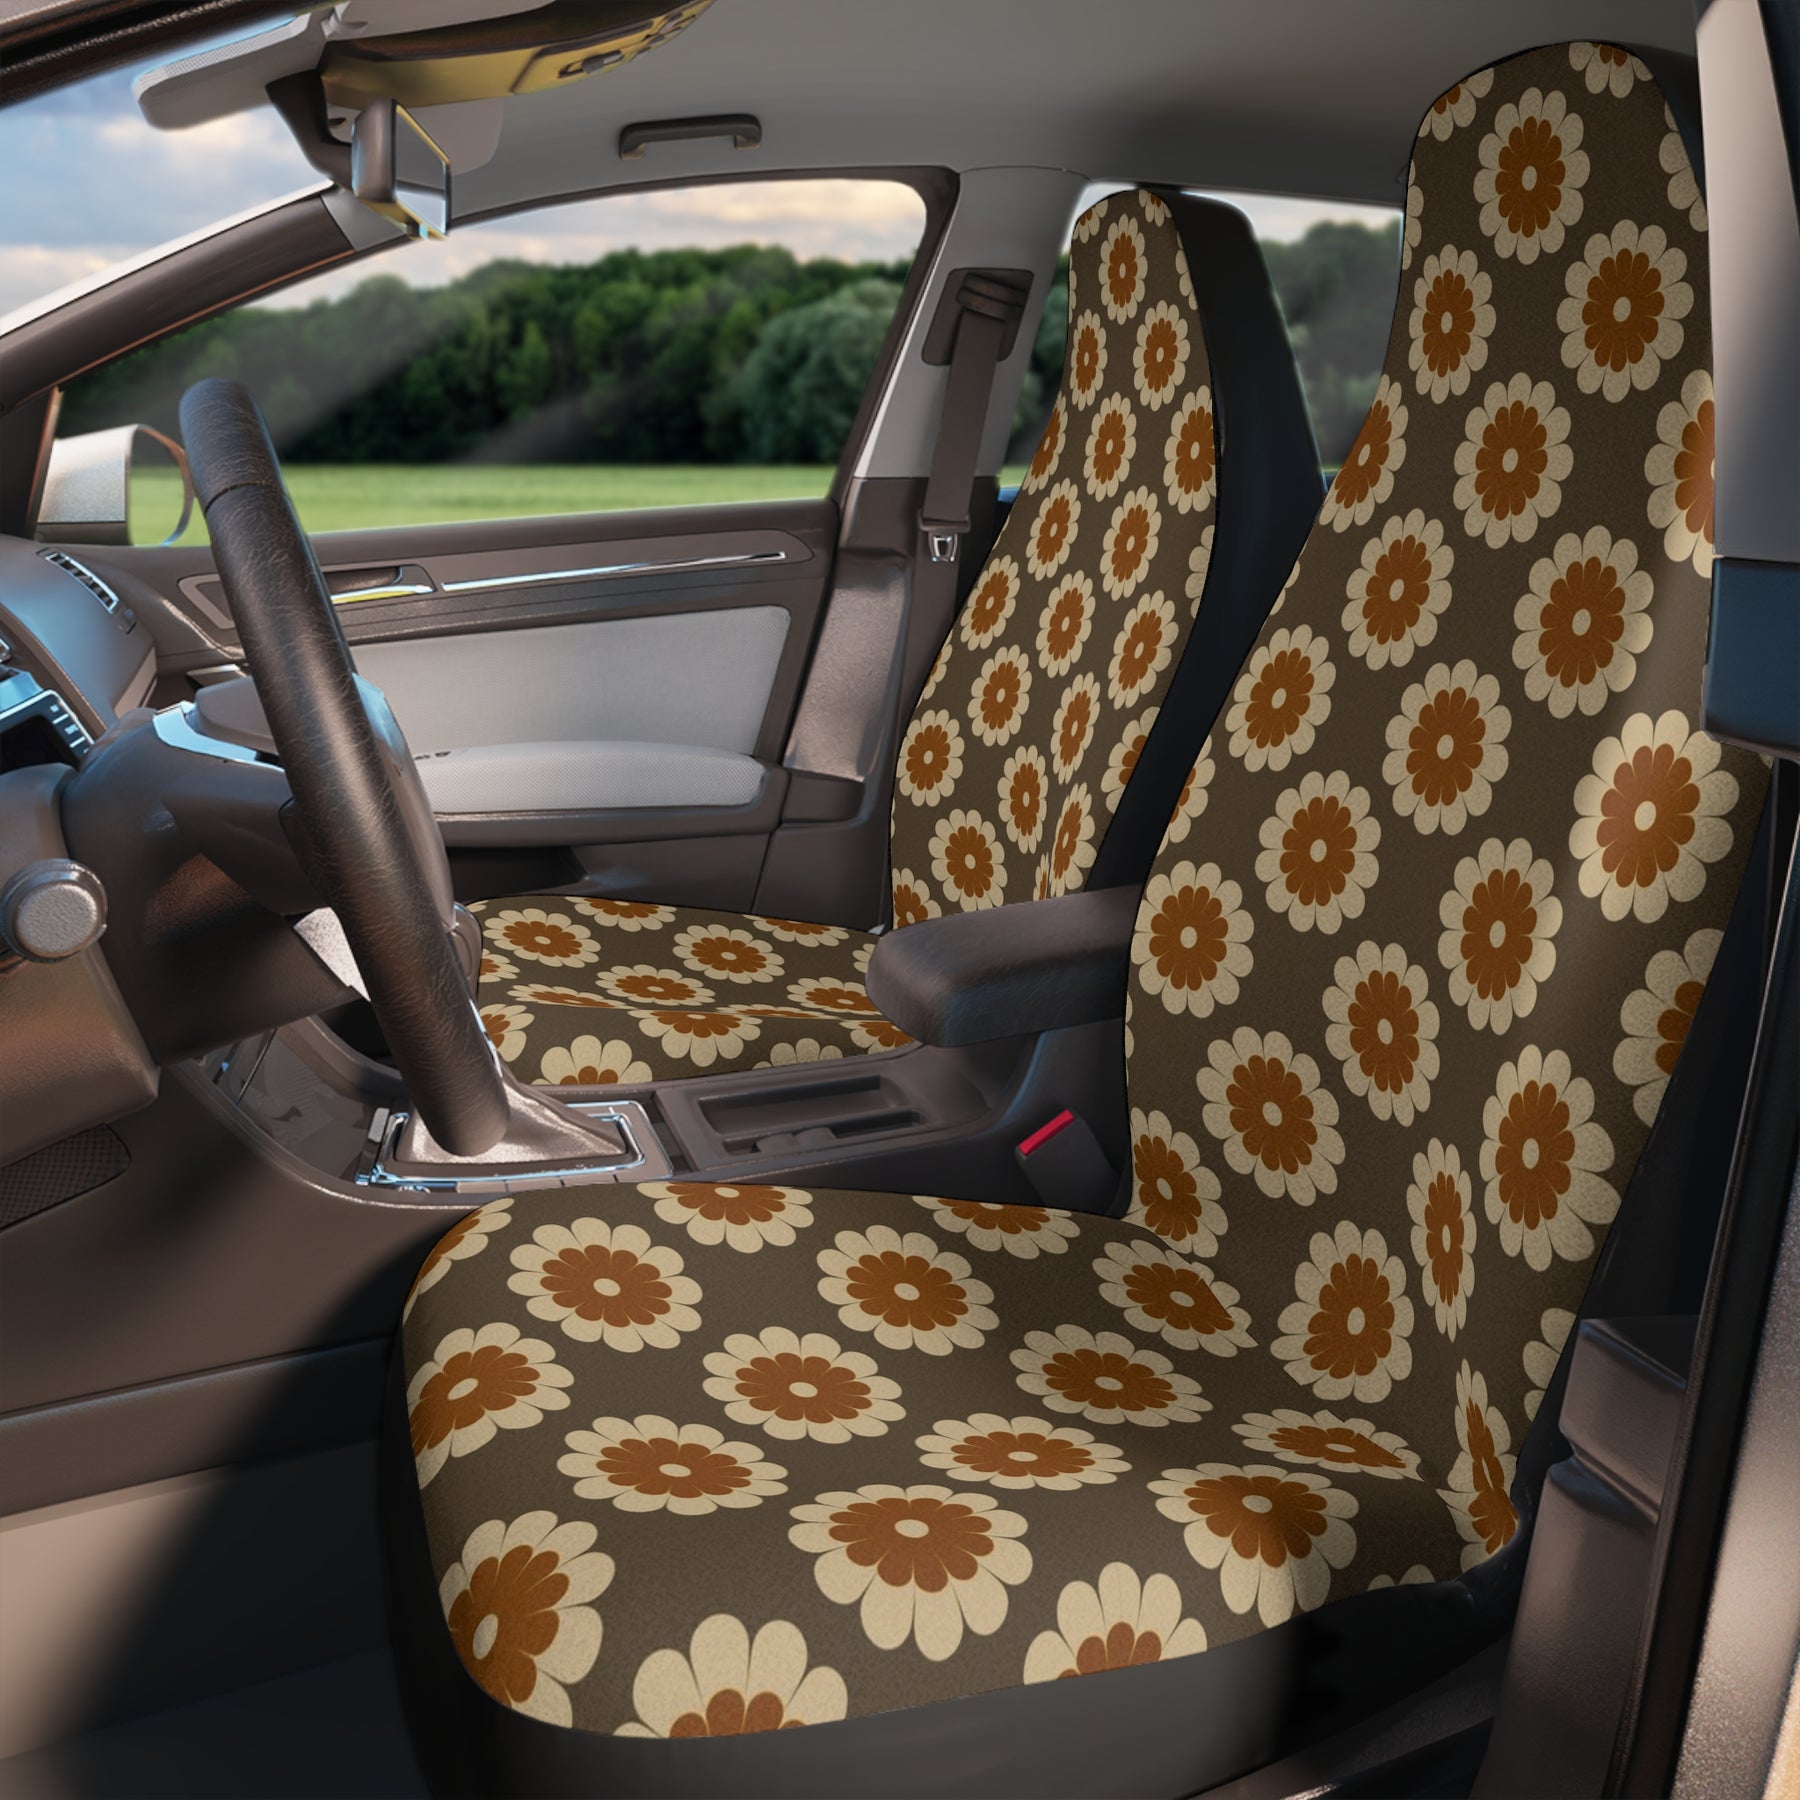 Mid-century modern flower pattern Car Seat Covers Set, Aesthetic Retro Brown Car Seat Cover, Gift for new driver, cute boho car decor